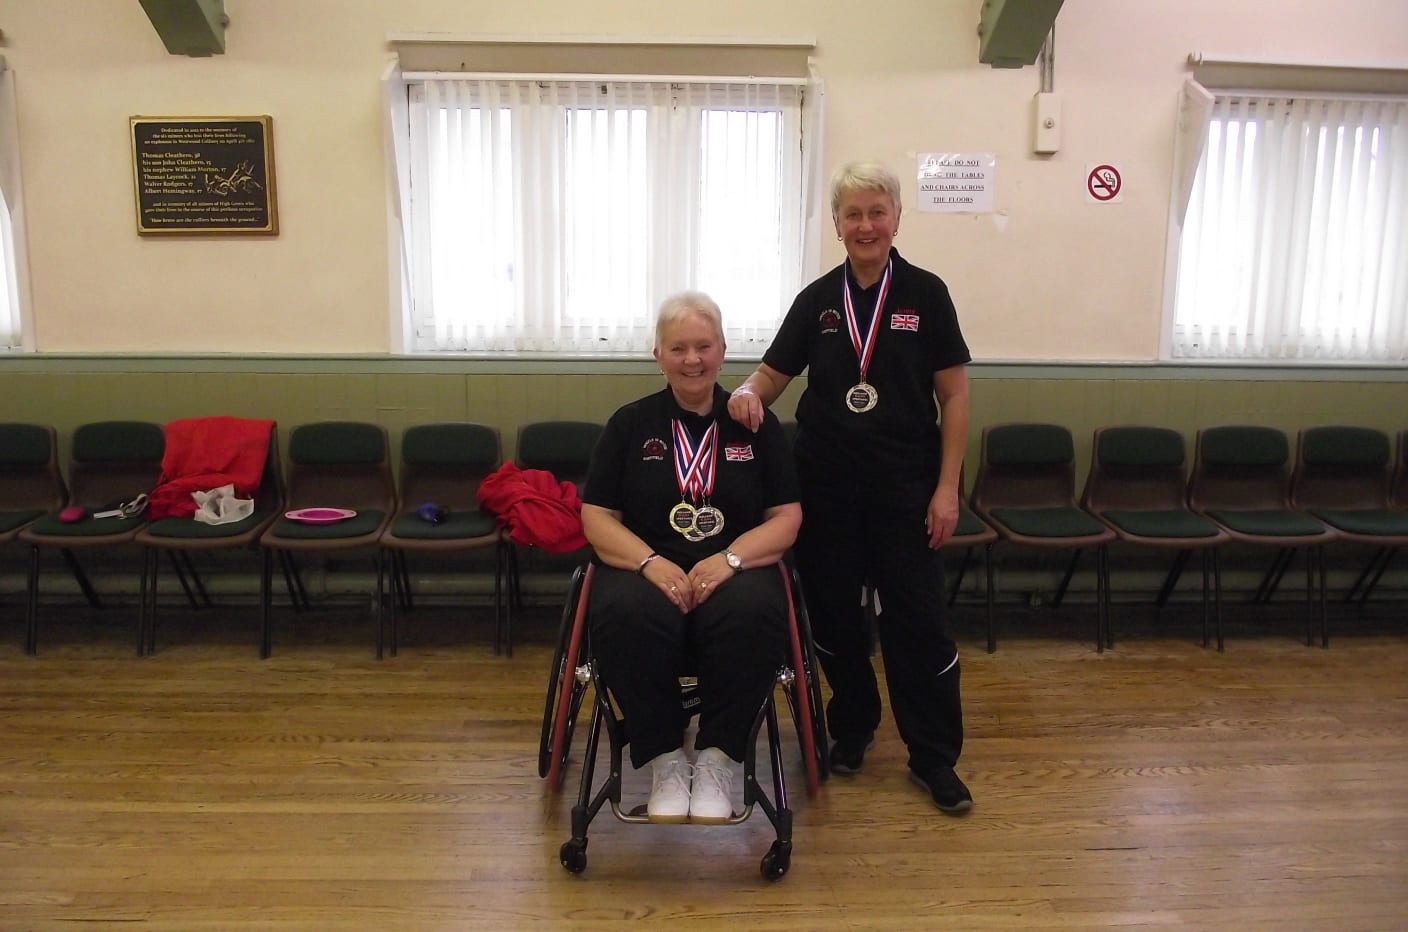 Bobbie with her coach and medals